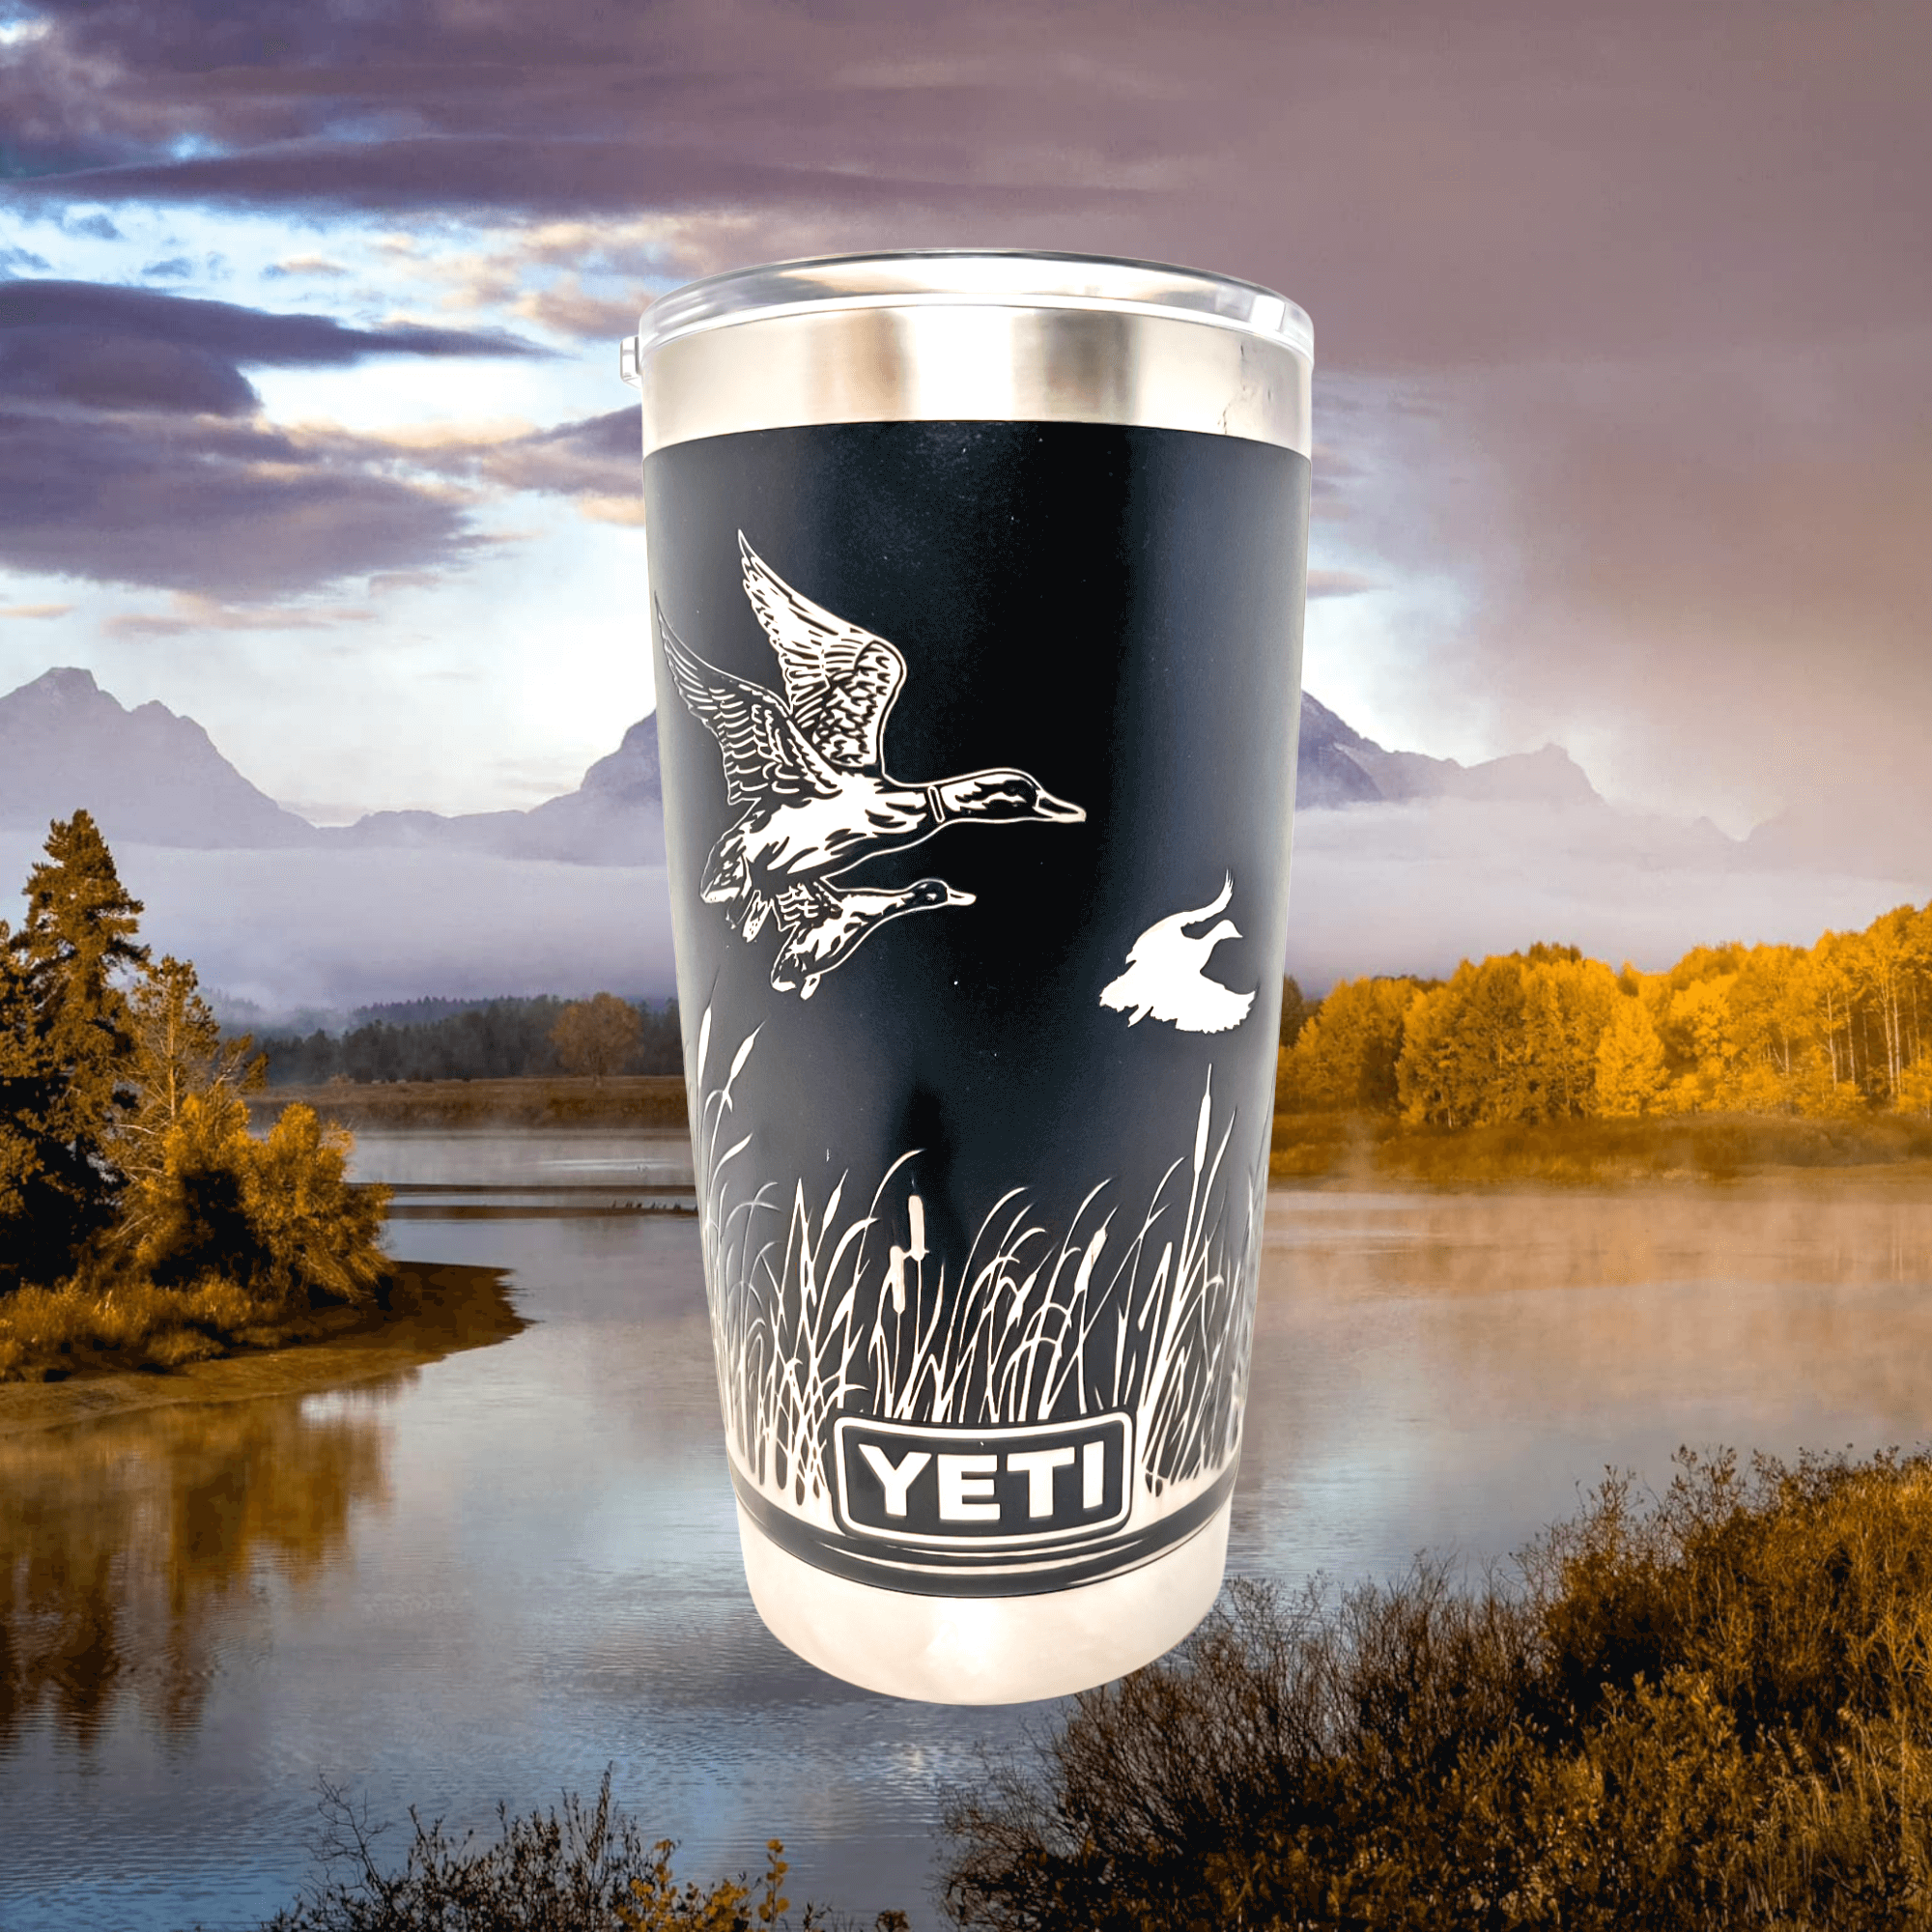 Alternate view of duck wrap Yeti tumbler with outdoor scene in background of photo